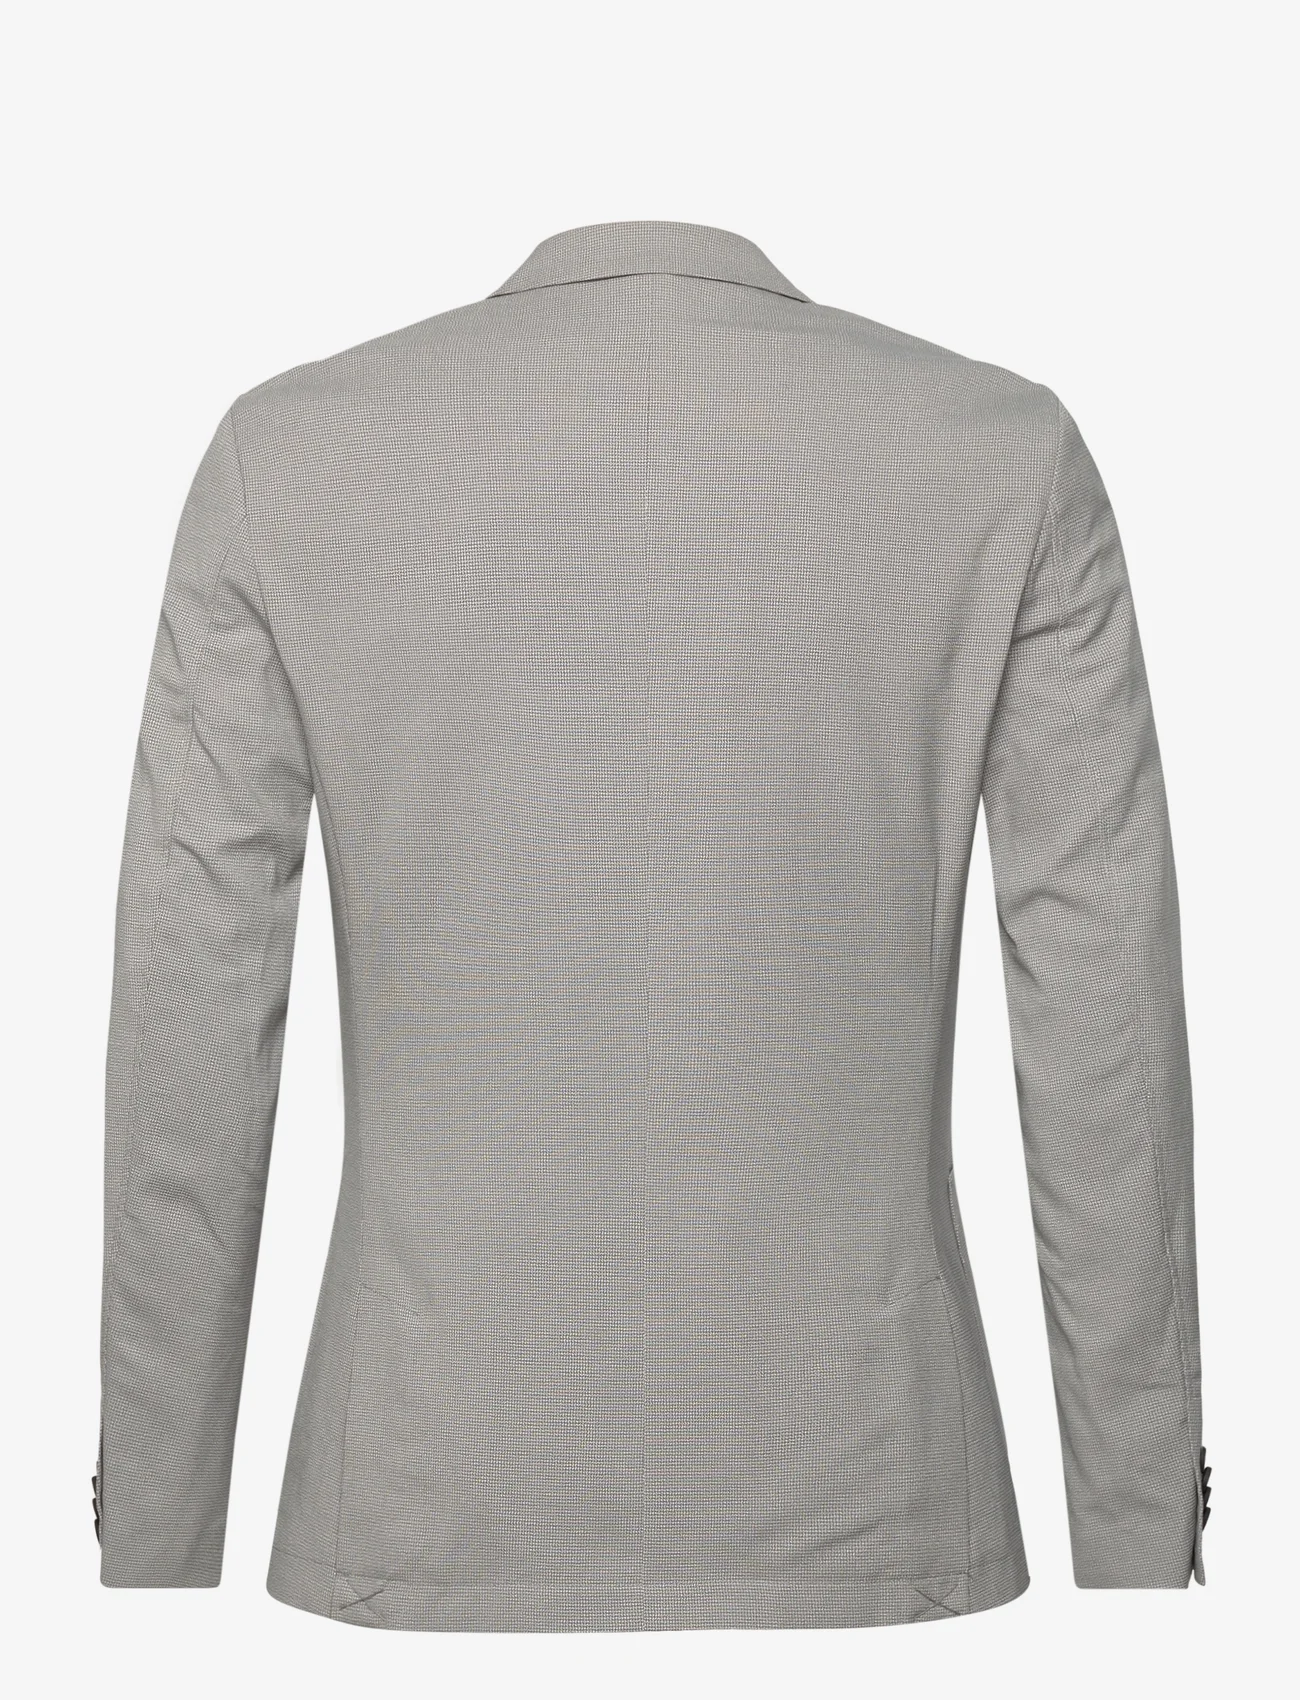 Tom Tailor - performance blazer - double breasted blazers - light grey white houndstooth - 1